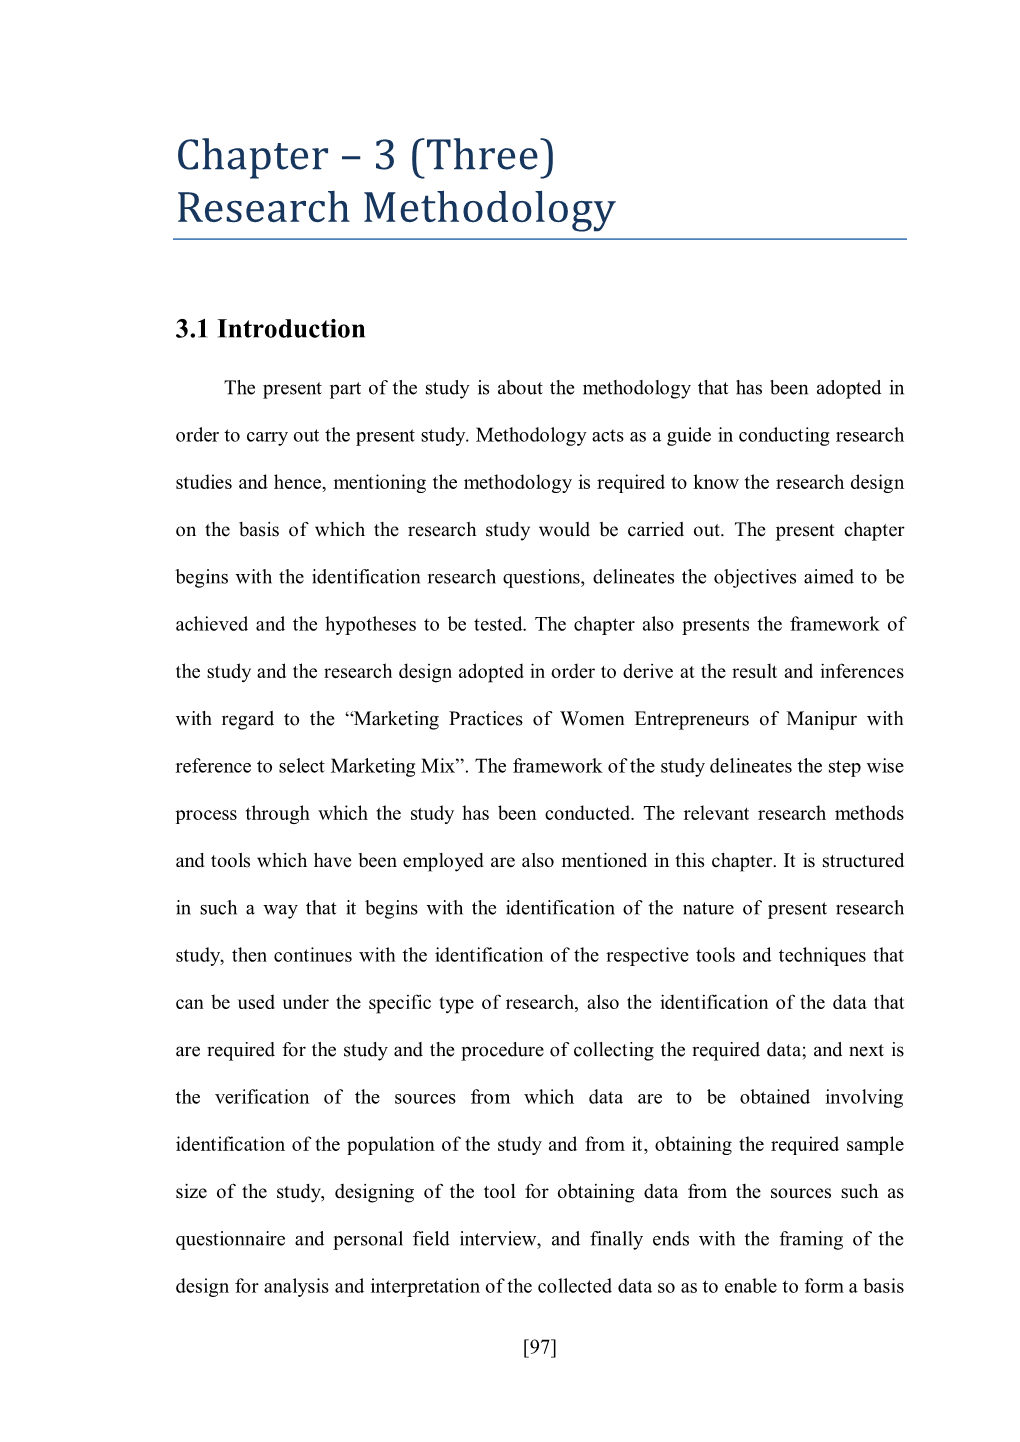 Chapter – 3 (Three) Research Methodology